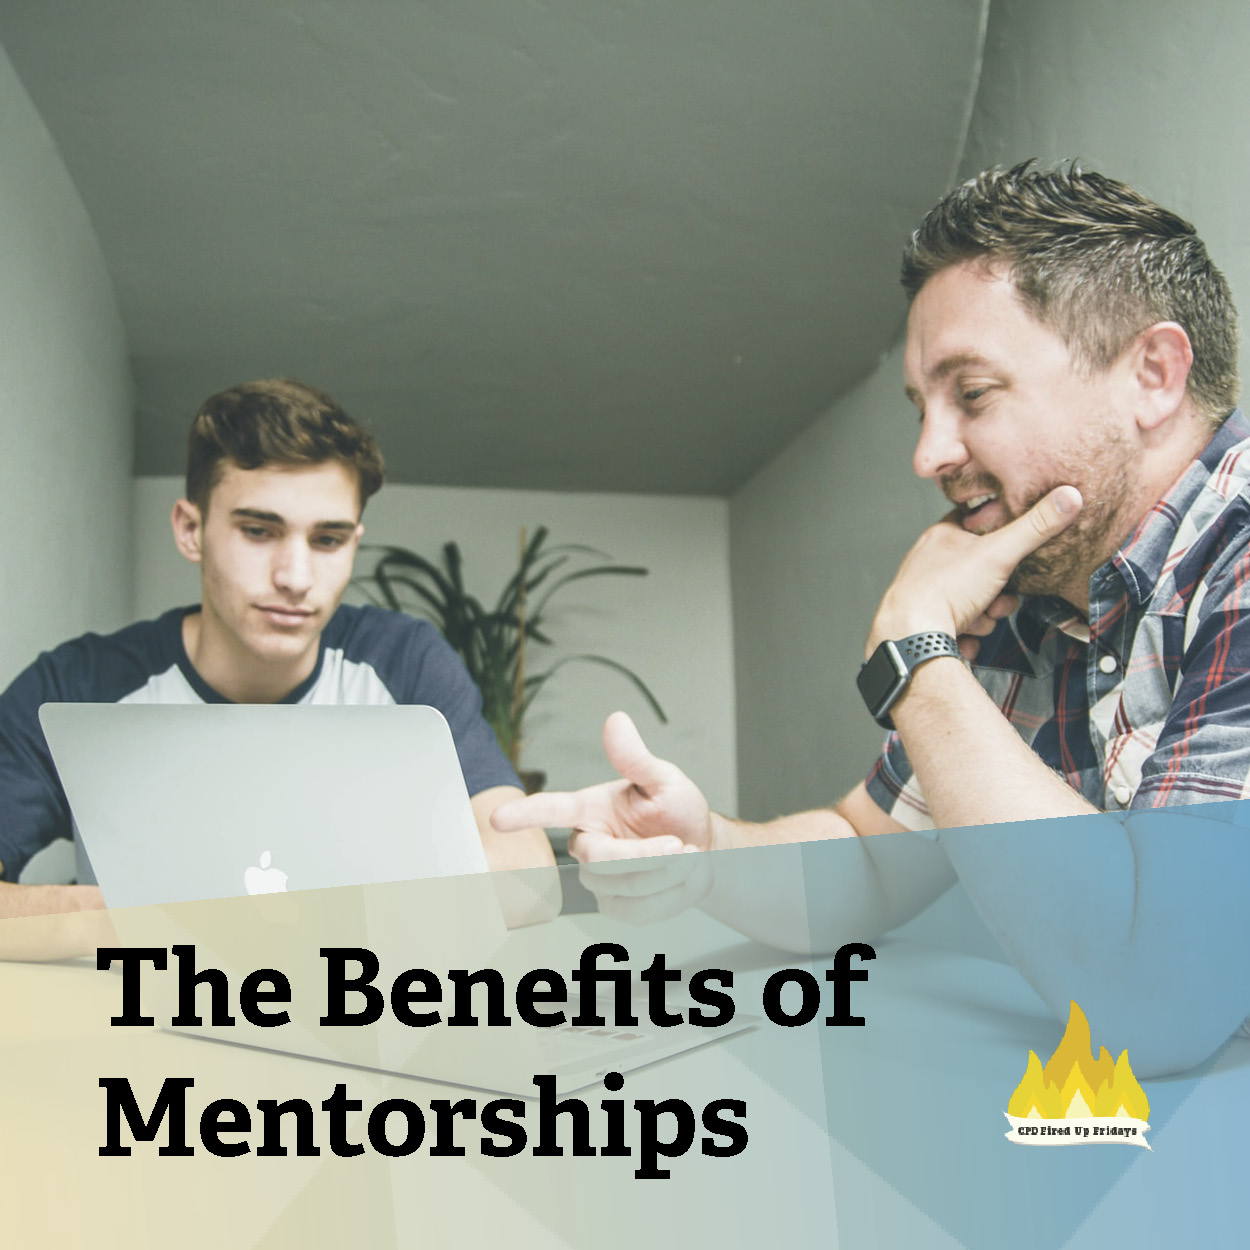 A man in a plaid shirt points to the screen of a laptop. To his right, a young man observes the screen, listening to what the first man is saying. Underneath, text reads: 'The Benefits of Mentorships.'